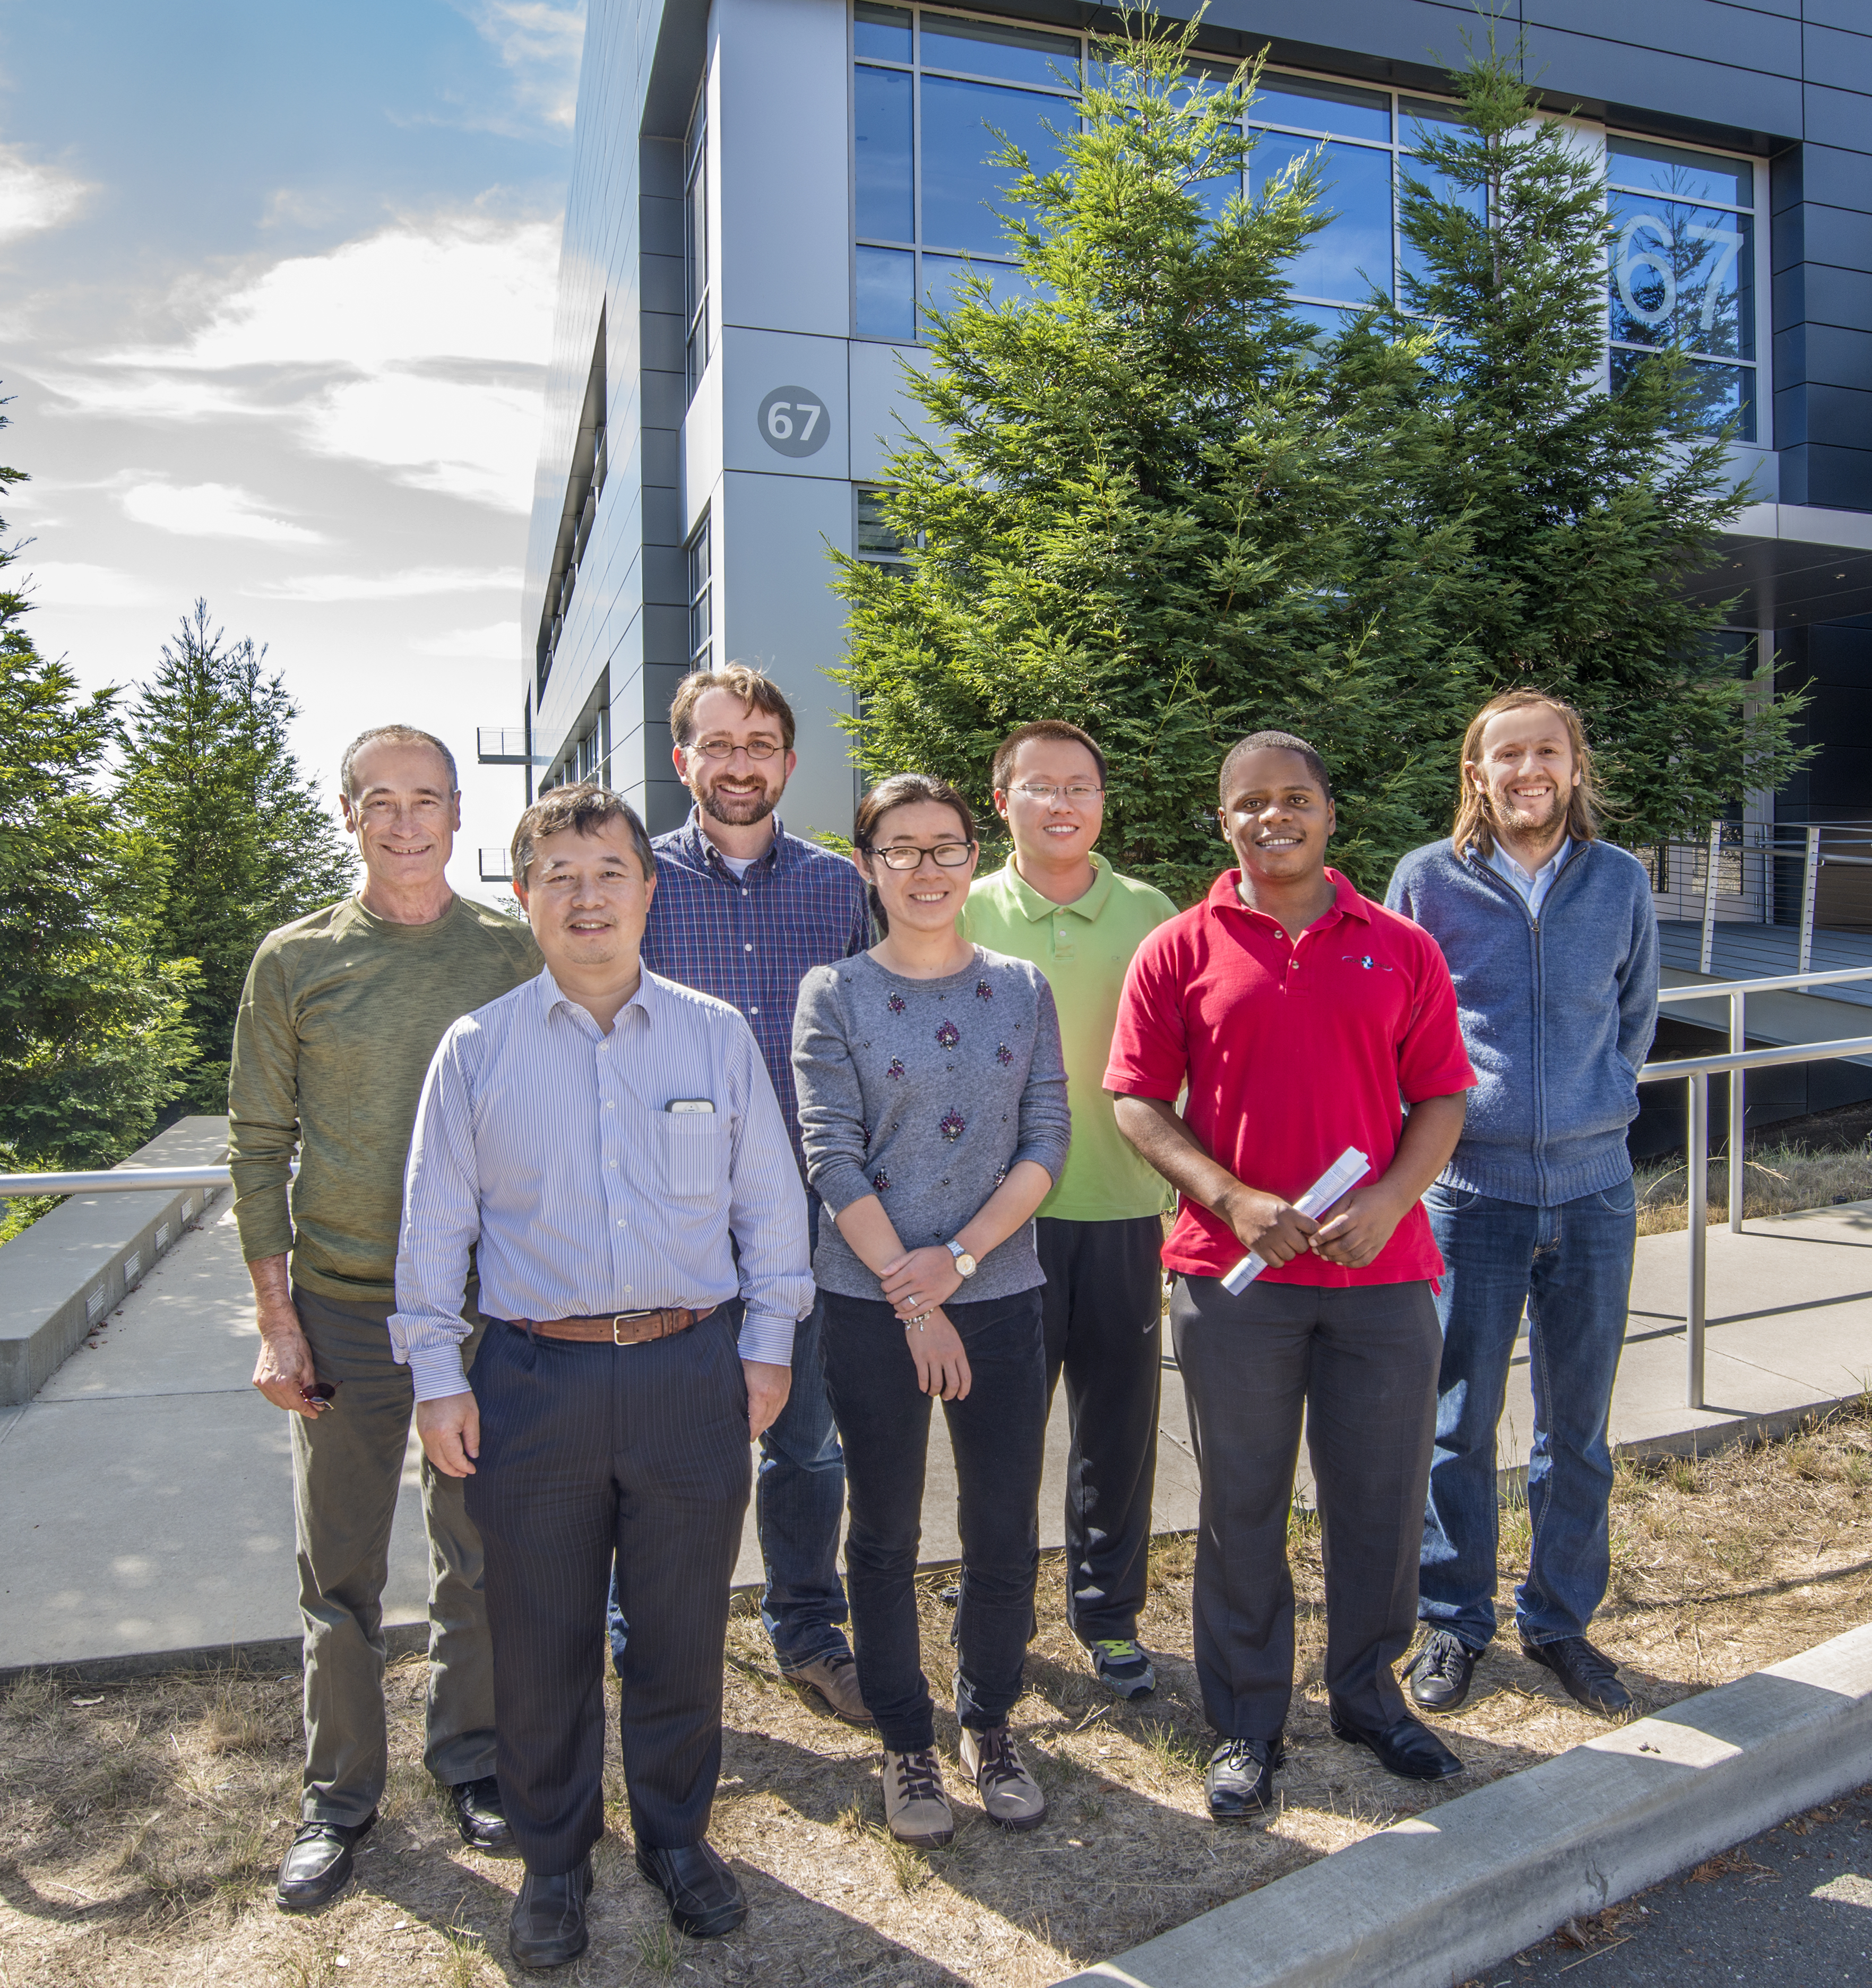 From left to right: Miquel Salmeron, Jinghua Guo, David Prendergast, Liwen Wan, Chenghao Wu, Tod Pascal and Juan-Jesus Velasco-Velez at the Molecular Foundry.